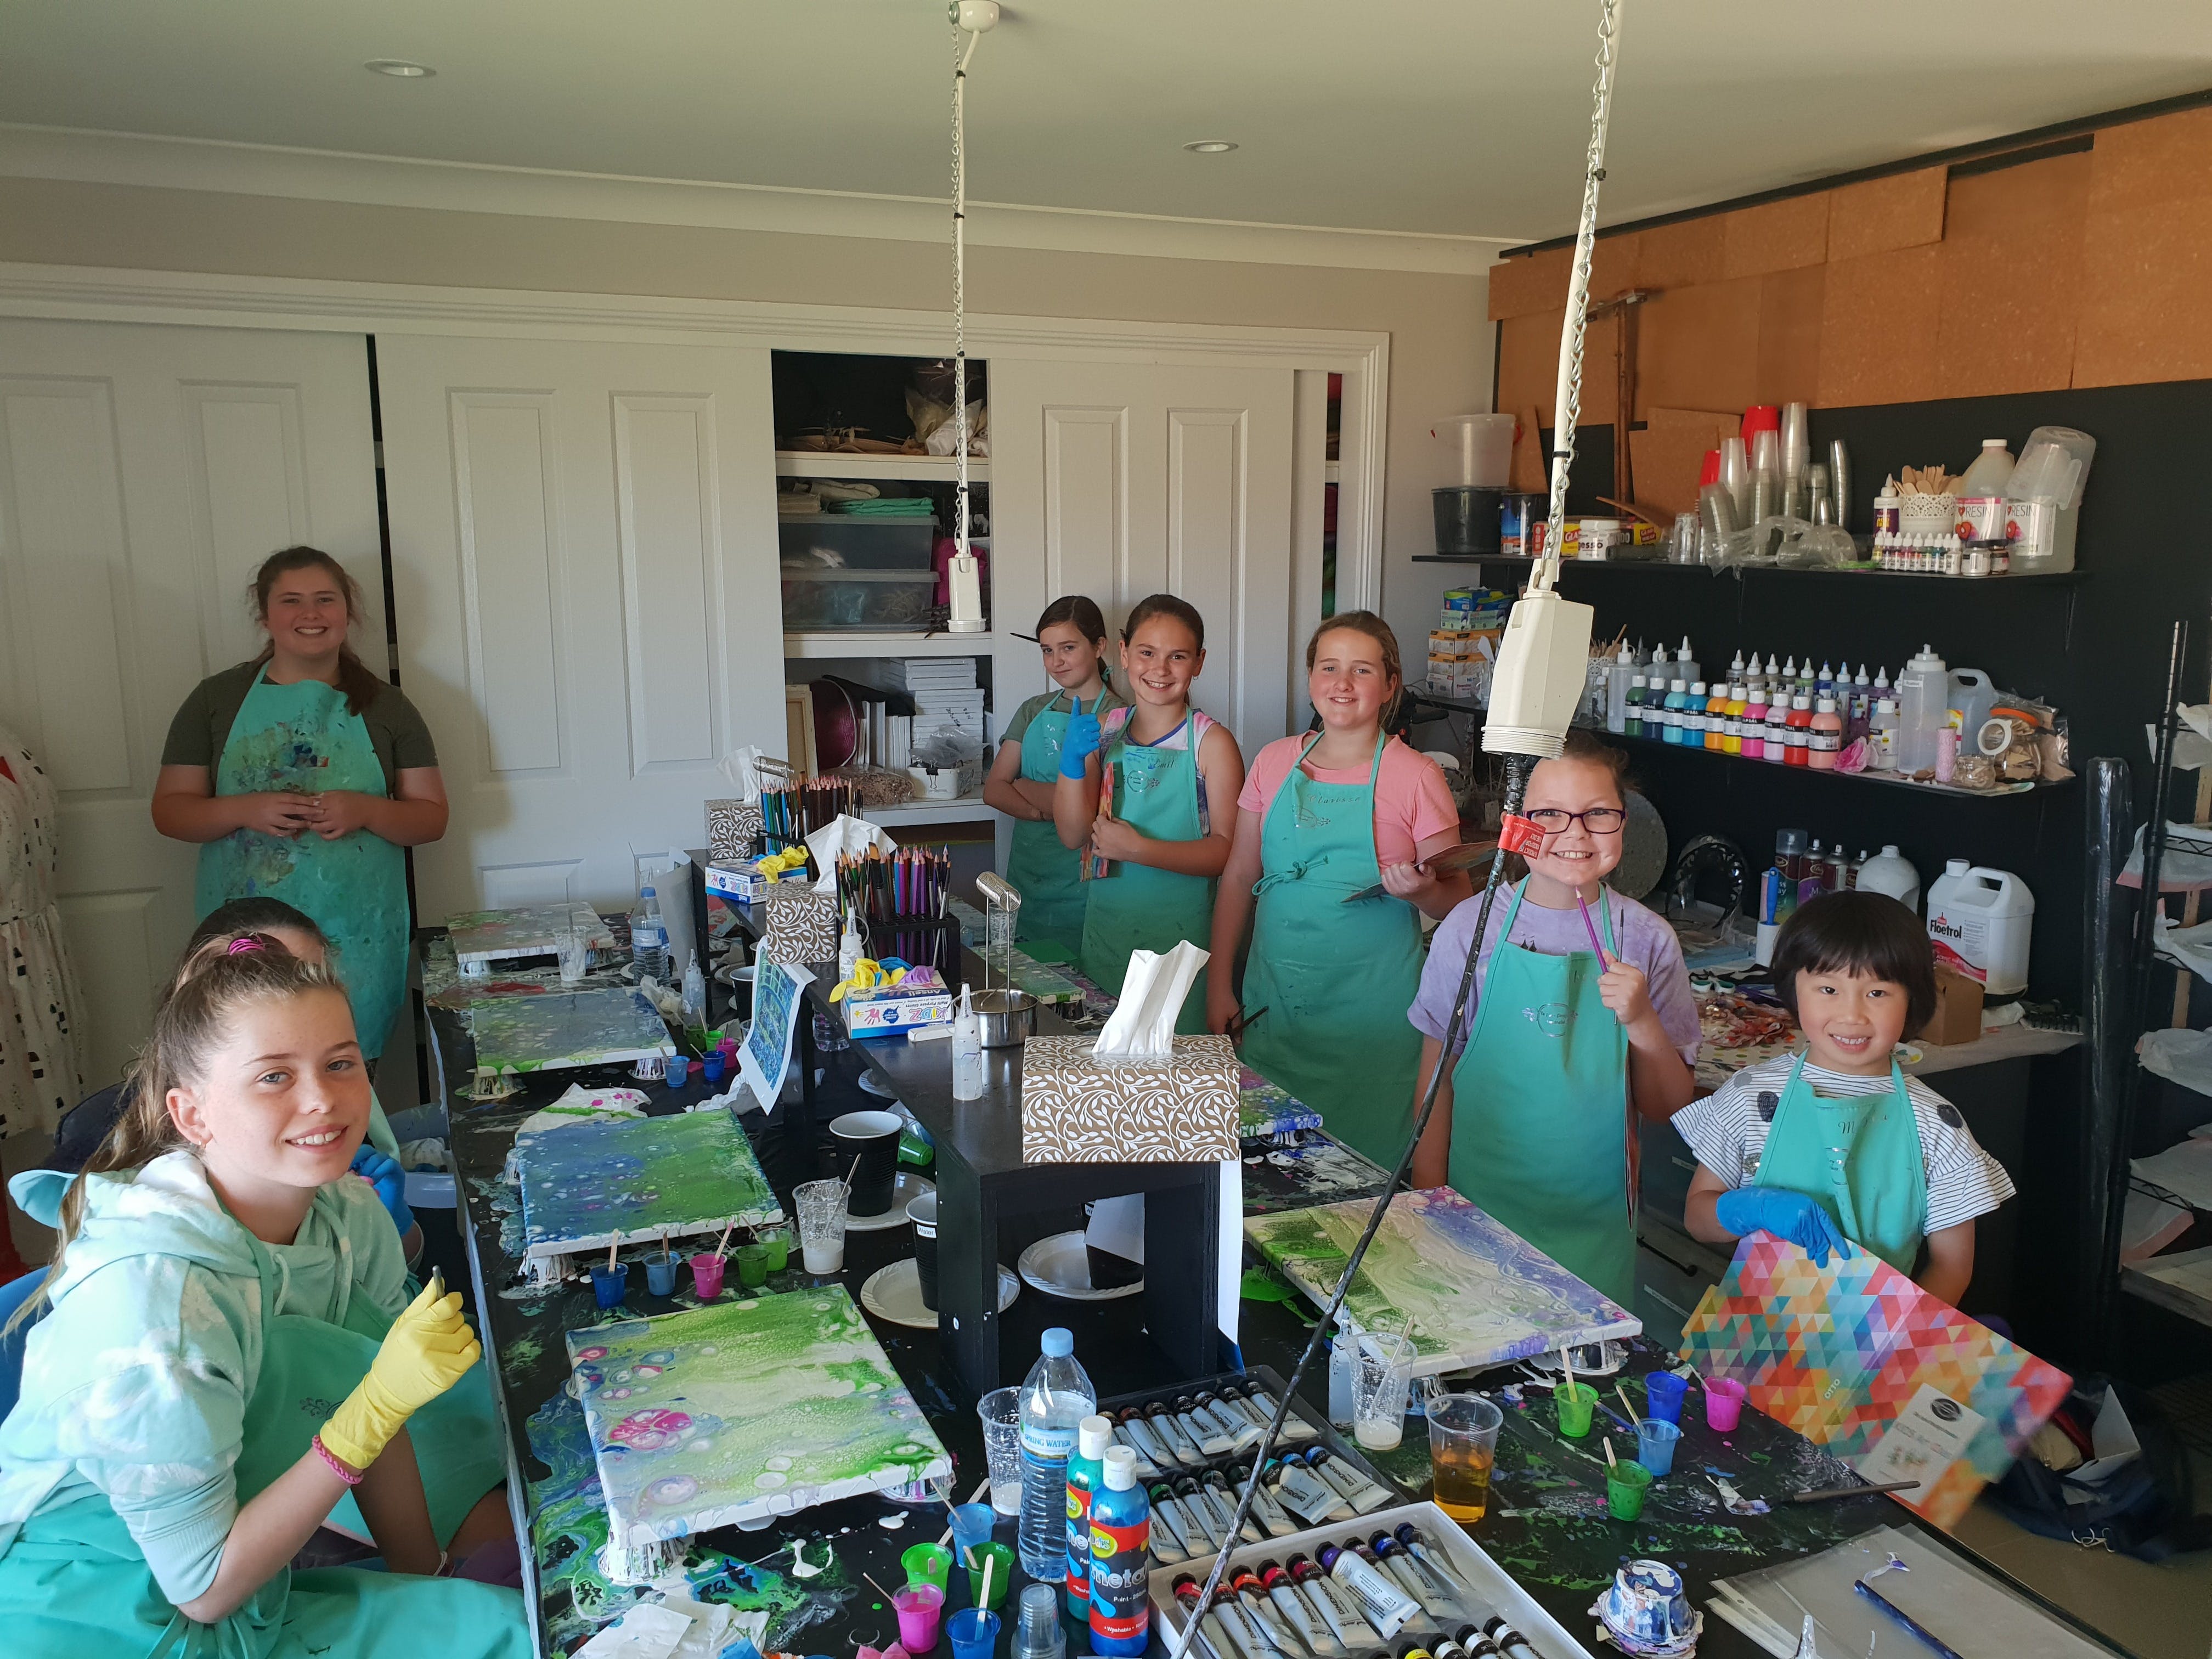 School holidays - Kids art class - Painting - Accommodation Redcliffe